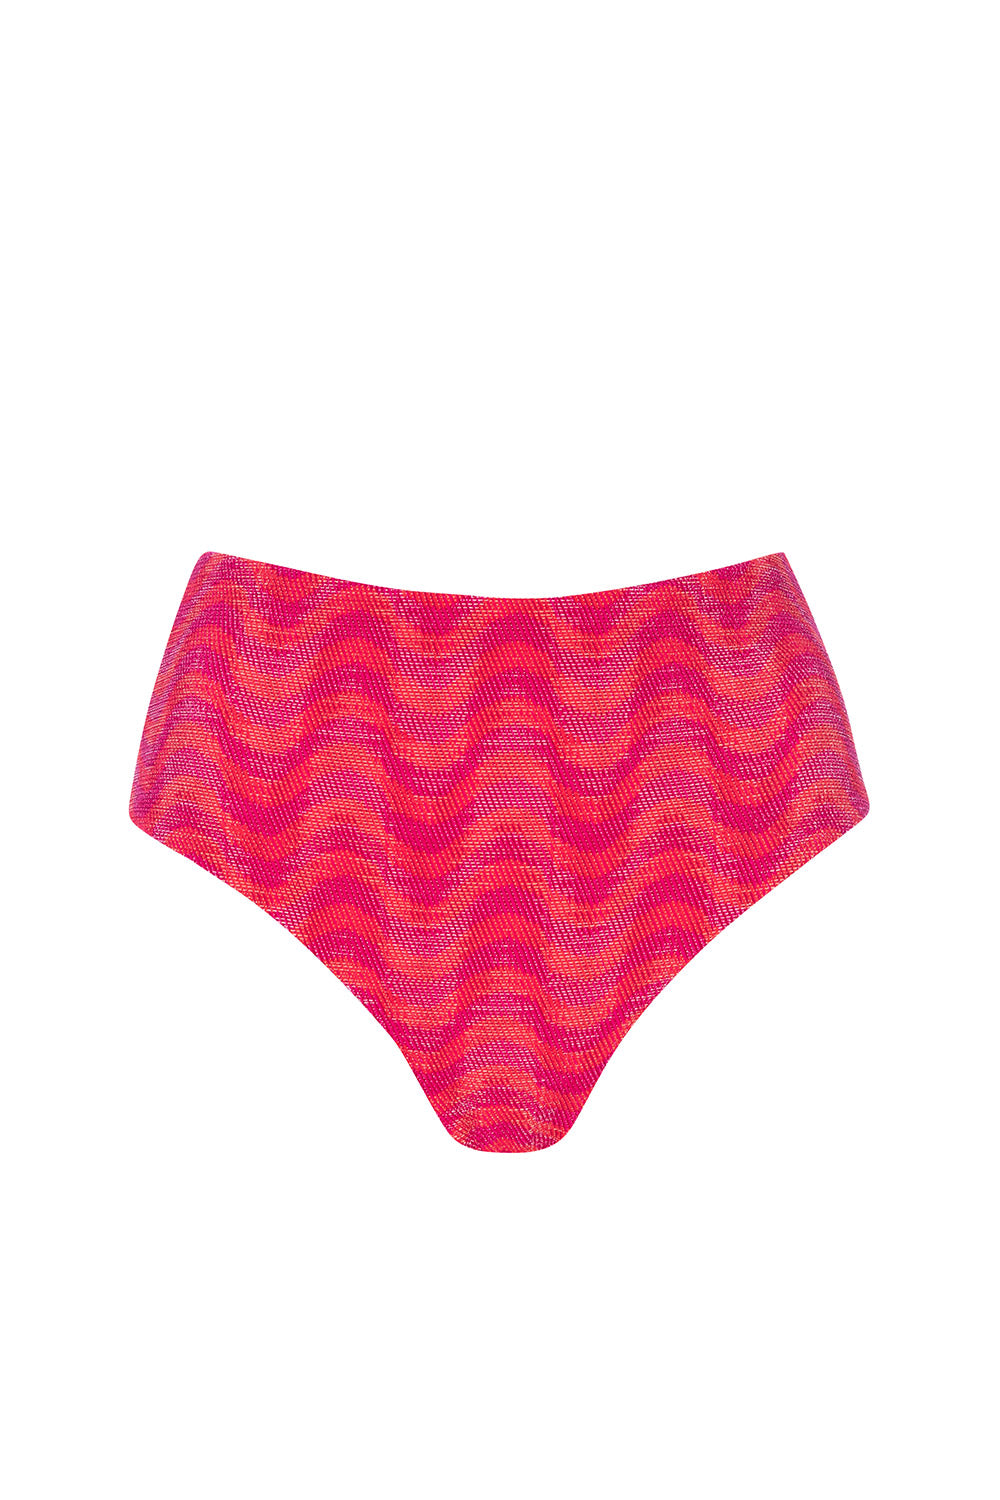 Front view of the Cabana high waist bottoms Geo set on the white background